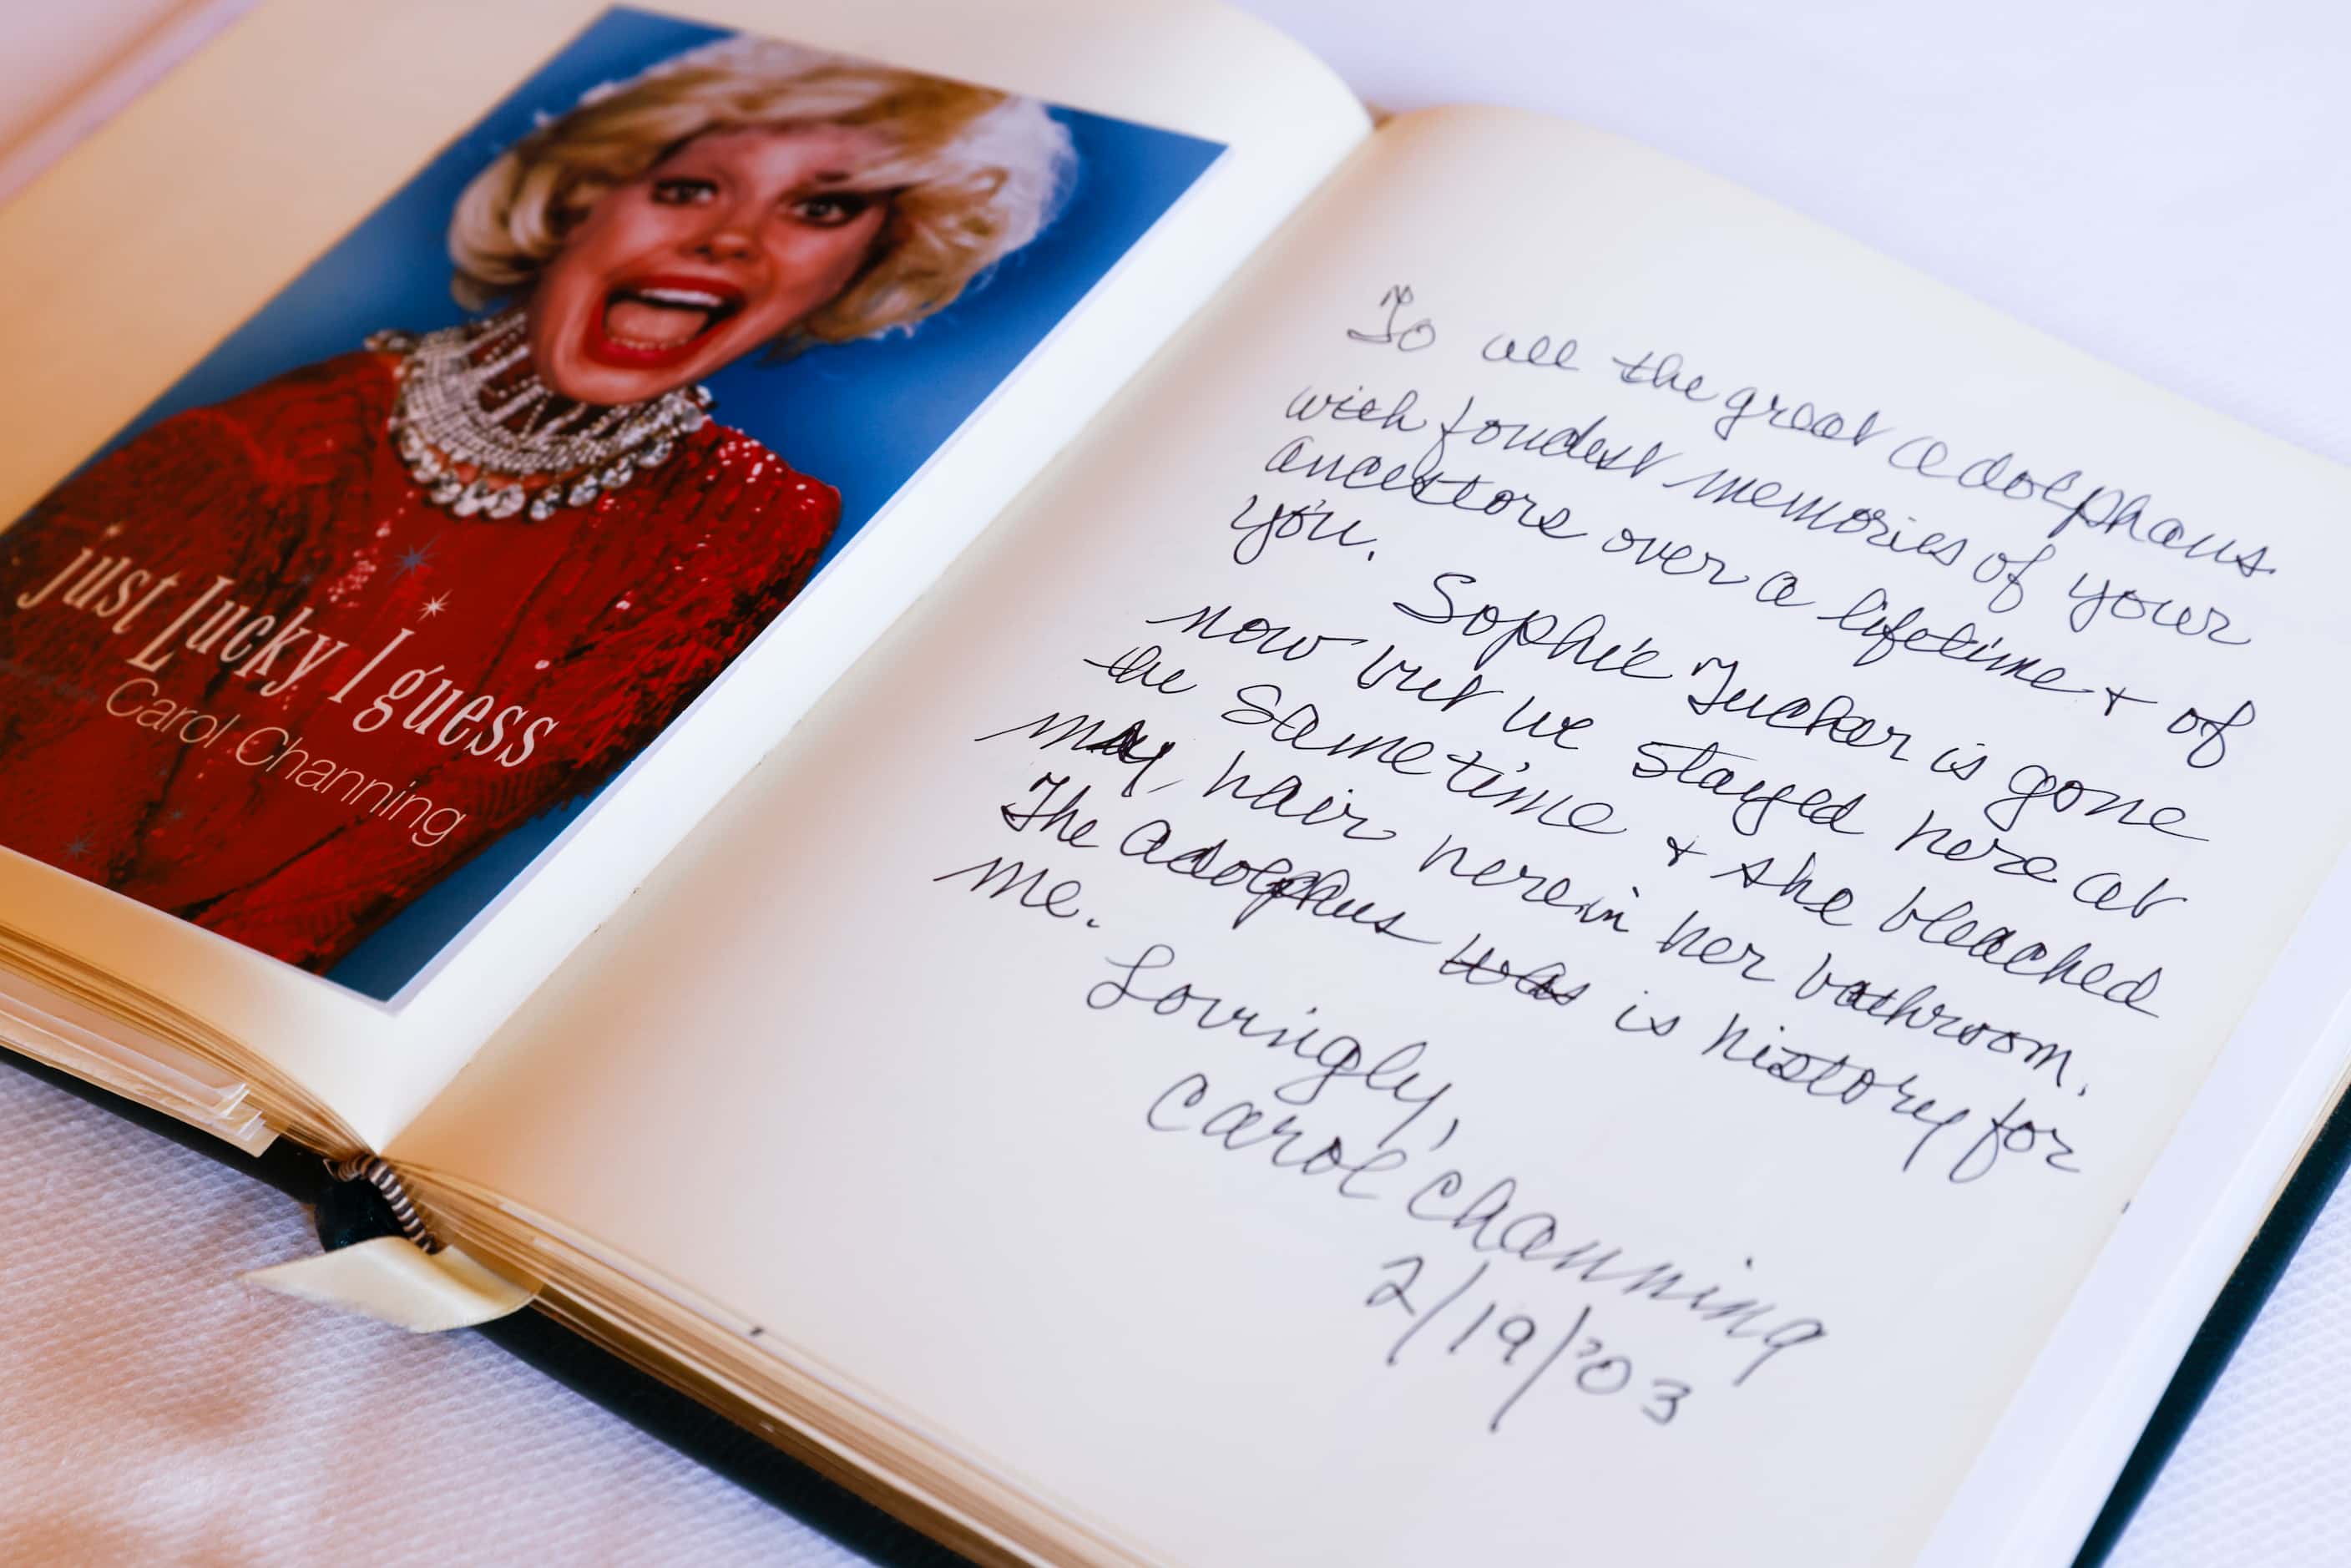 A note left by late actress Carol Channing from her visit in 2003 at the Adolphus Hotel in...